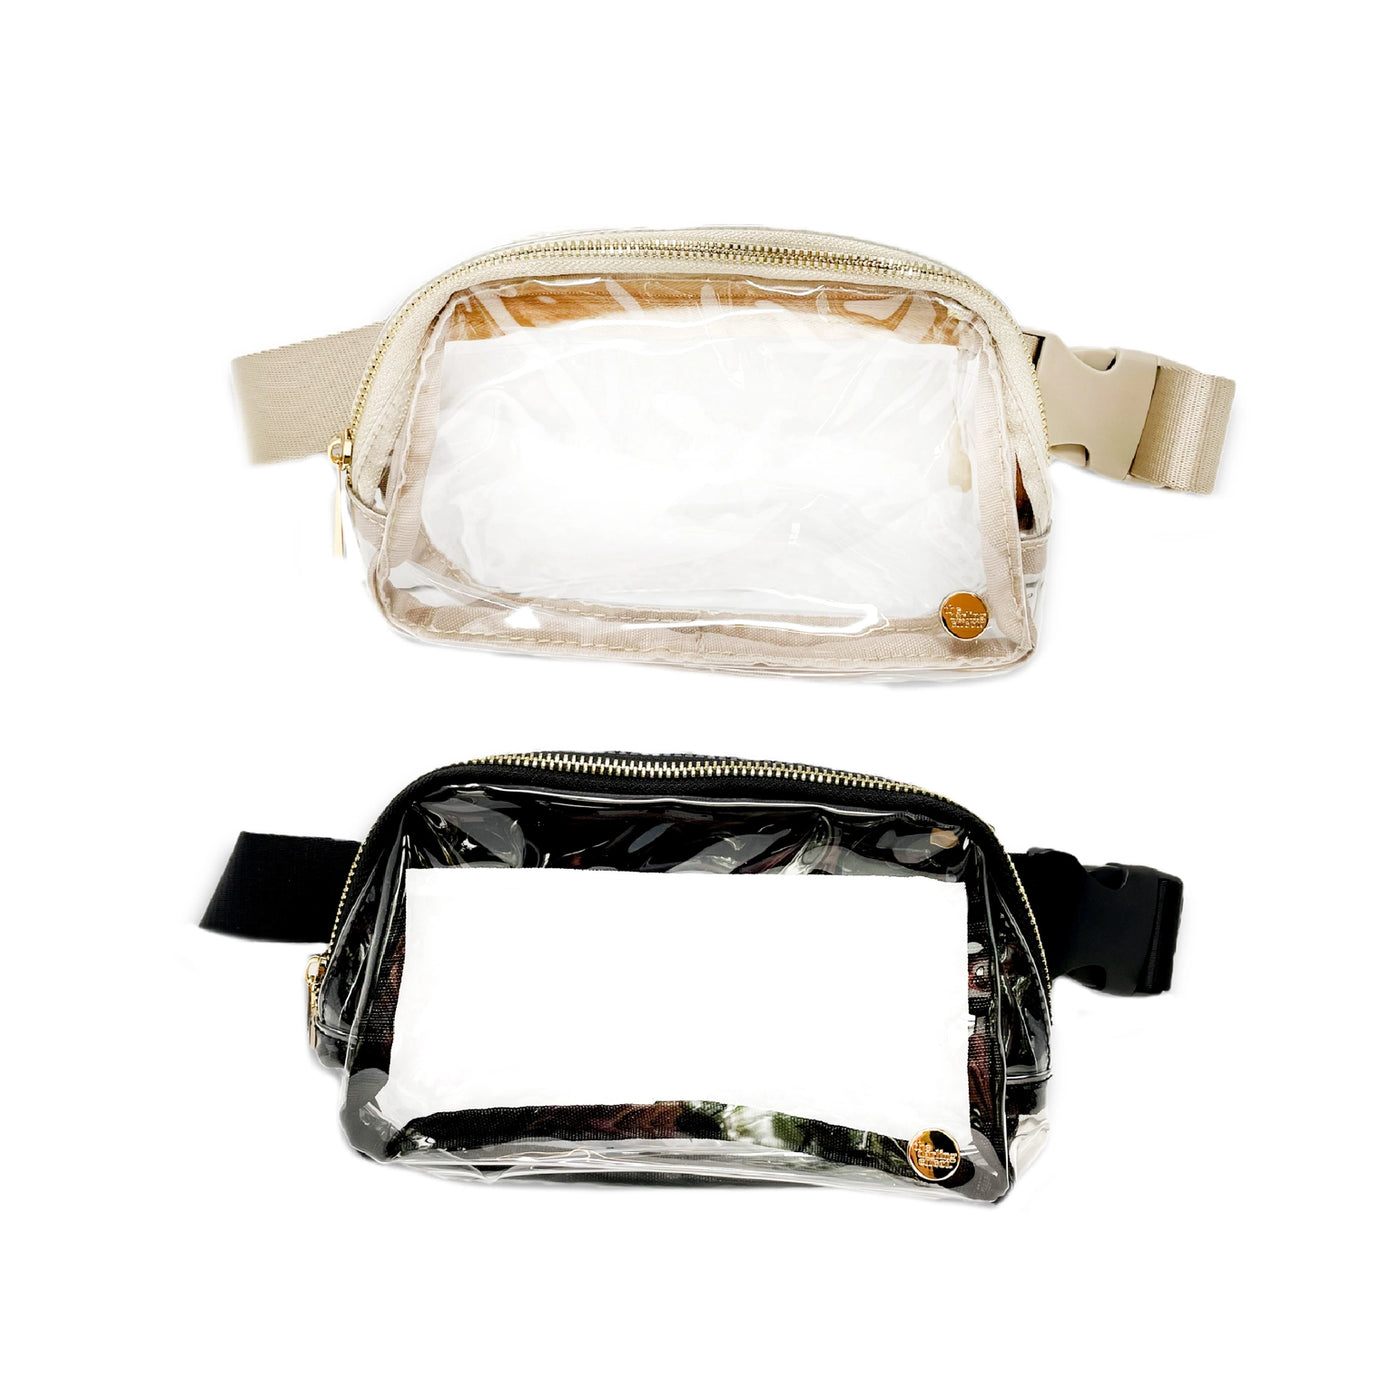 Clear Stadium Belt Bag From The Darling Effect